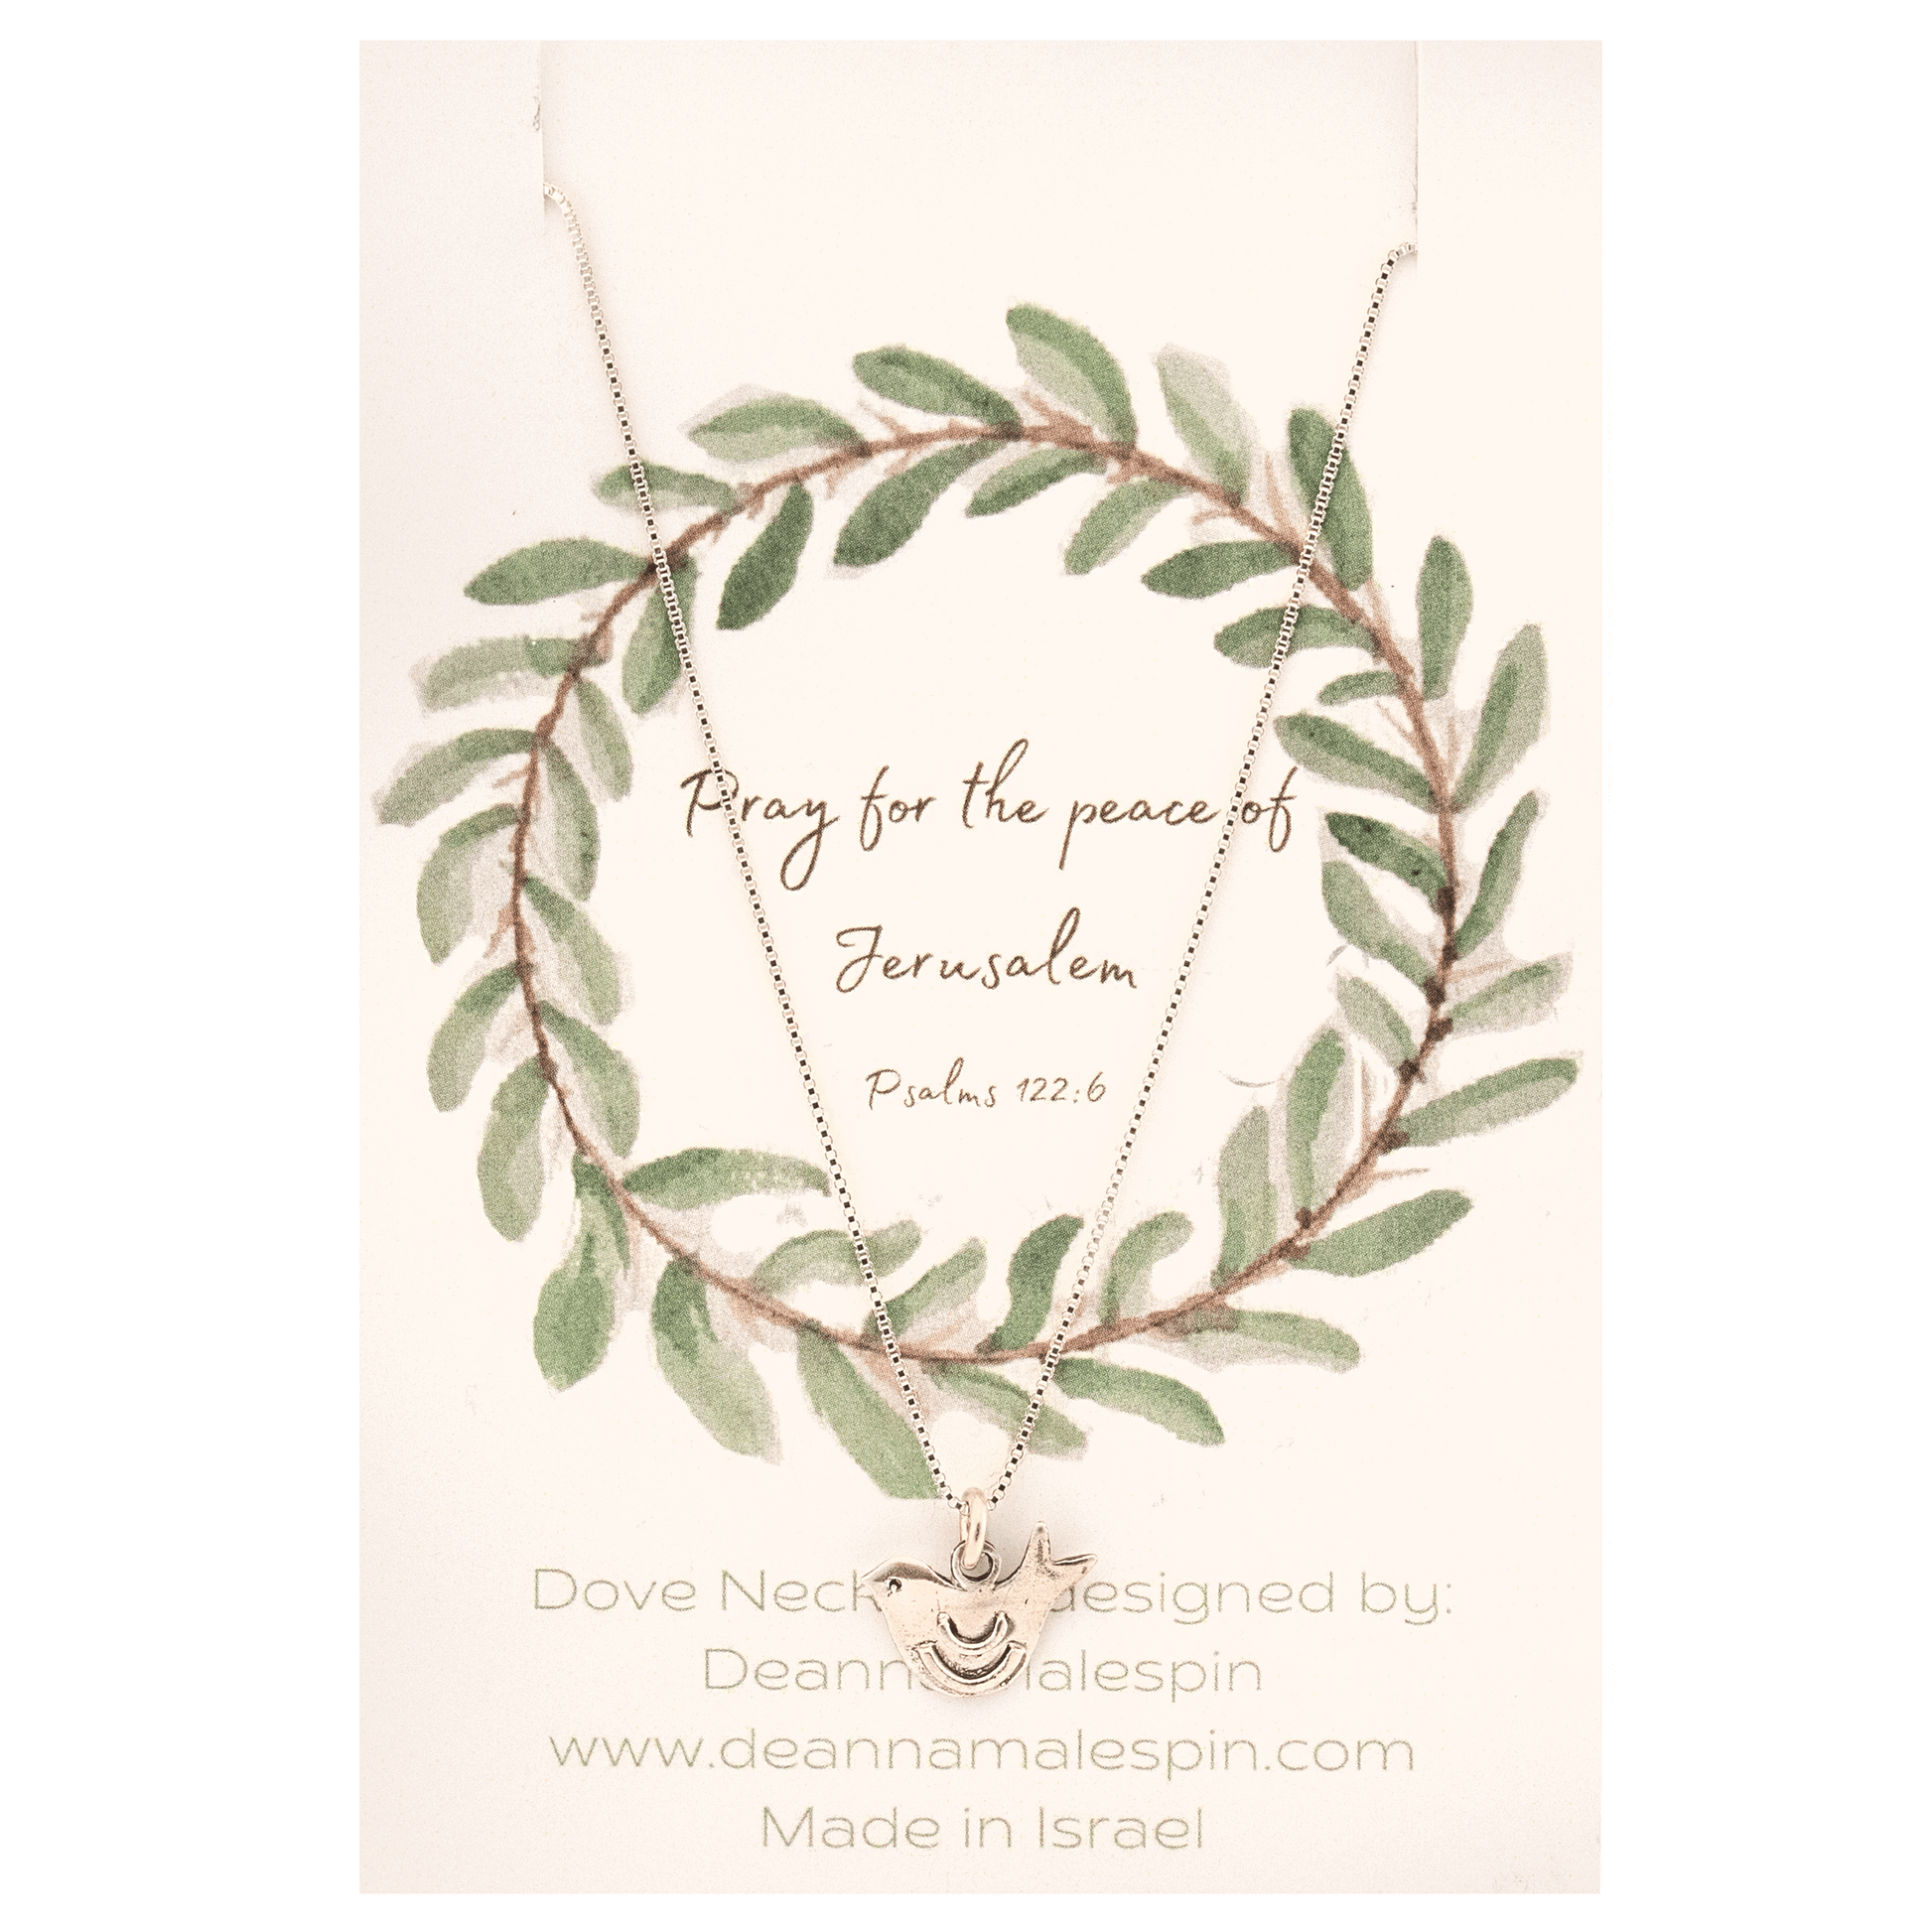 Silver Dove pendant on a silver chain hung on Psalms 122:6 card